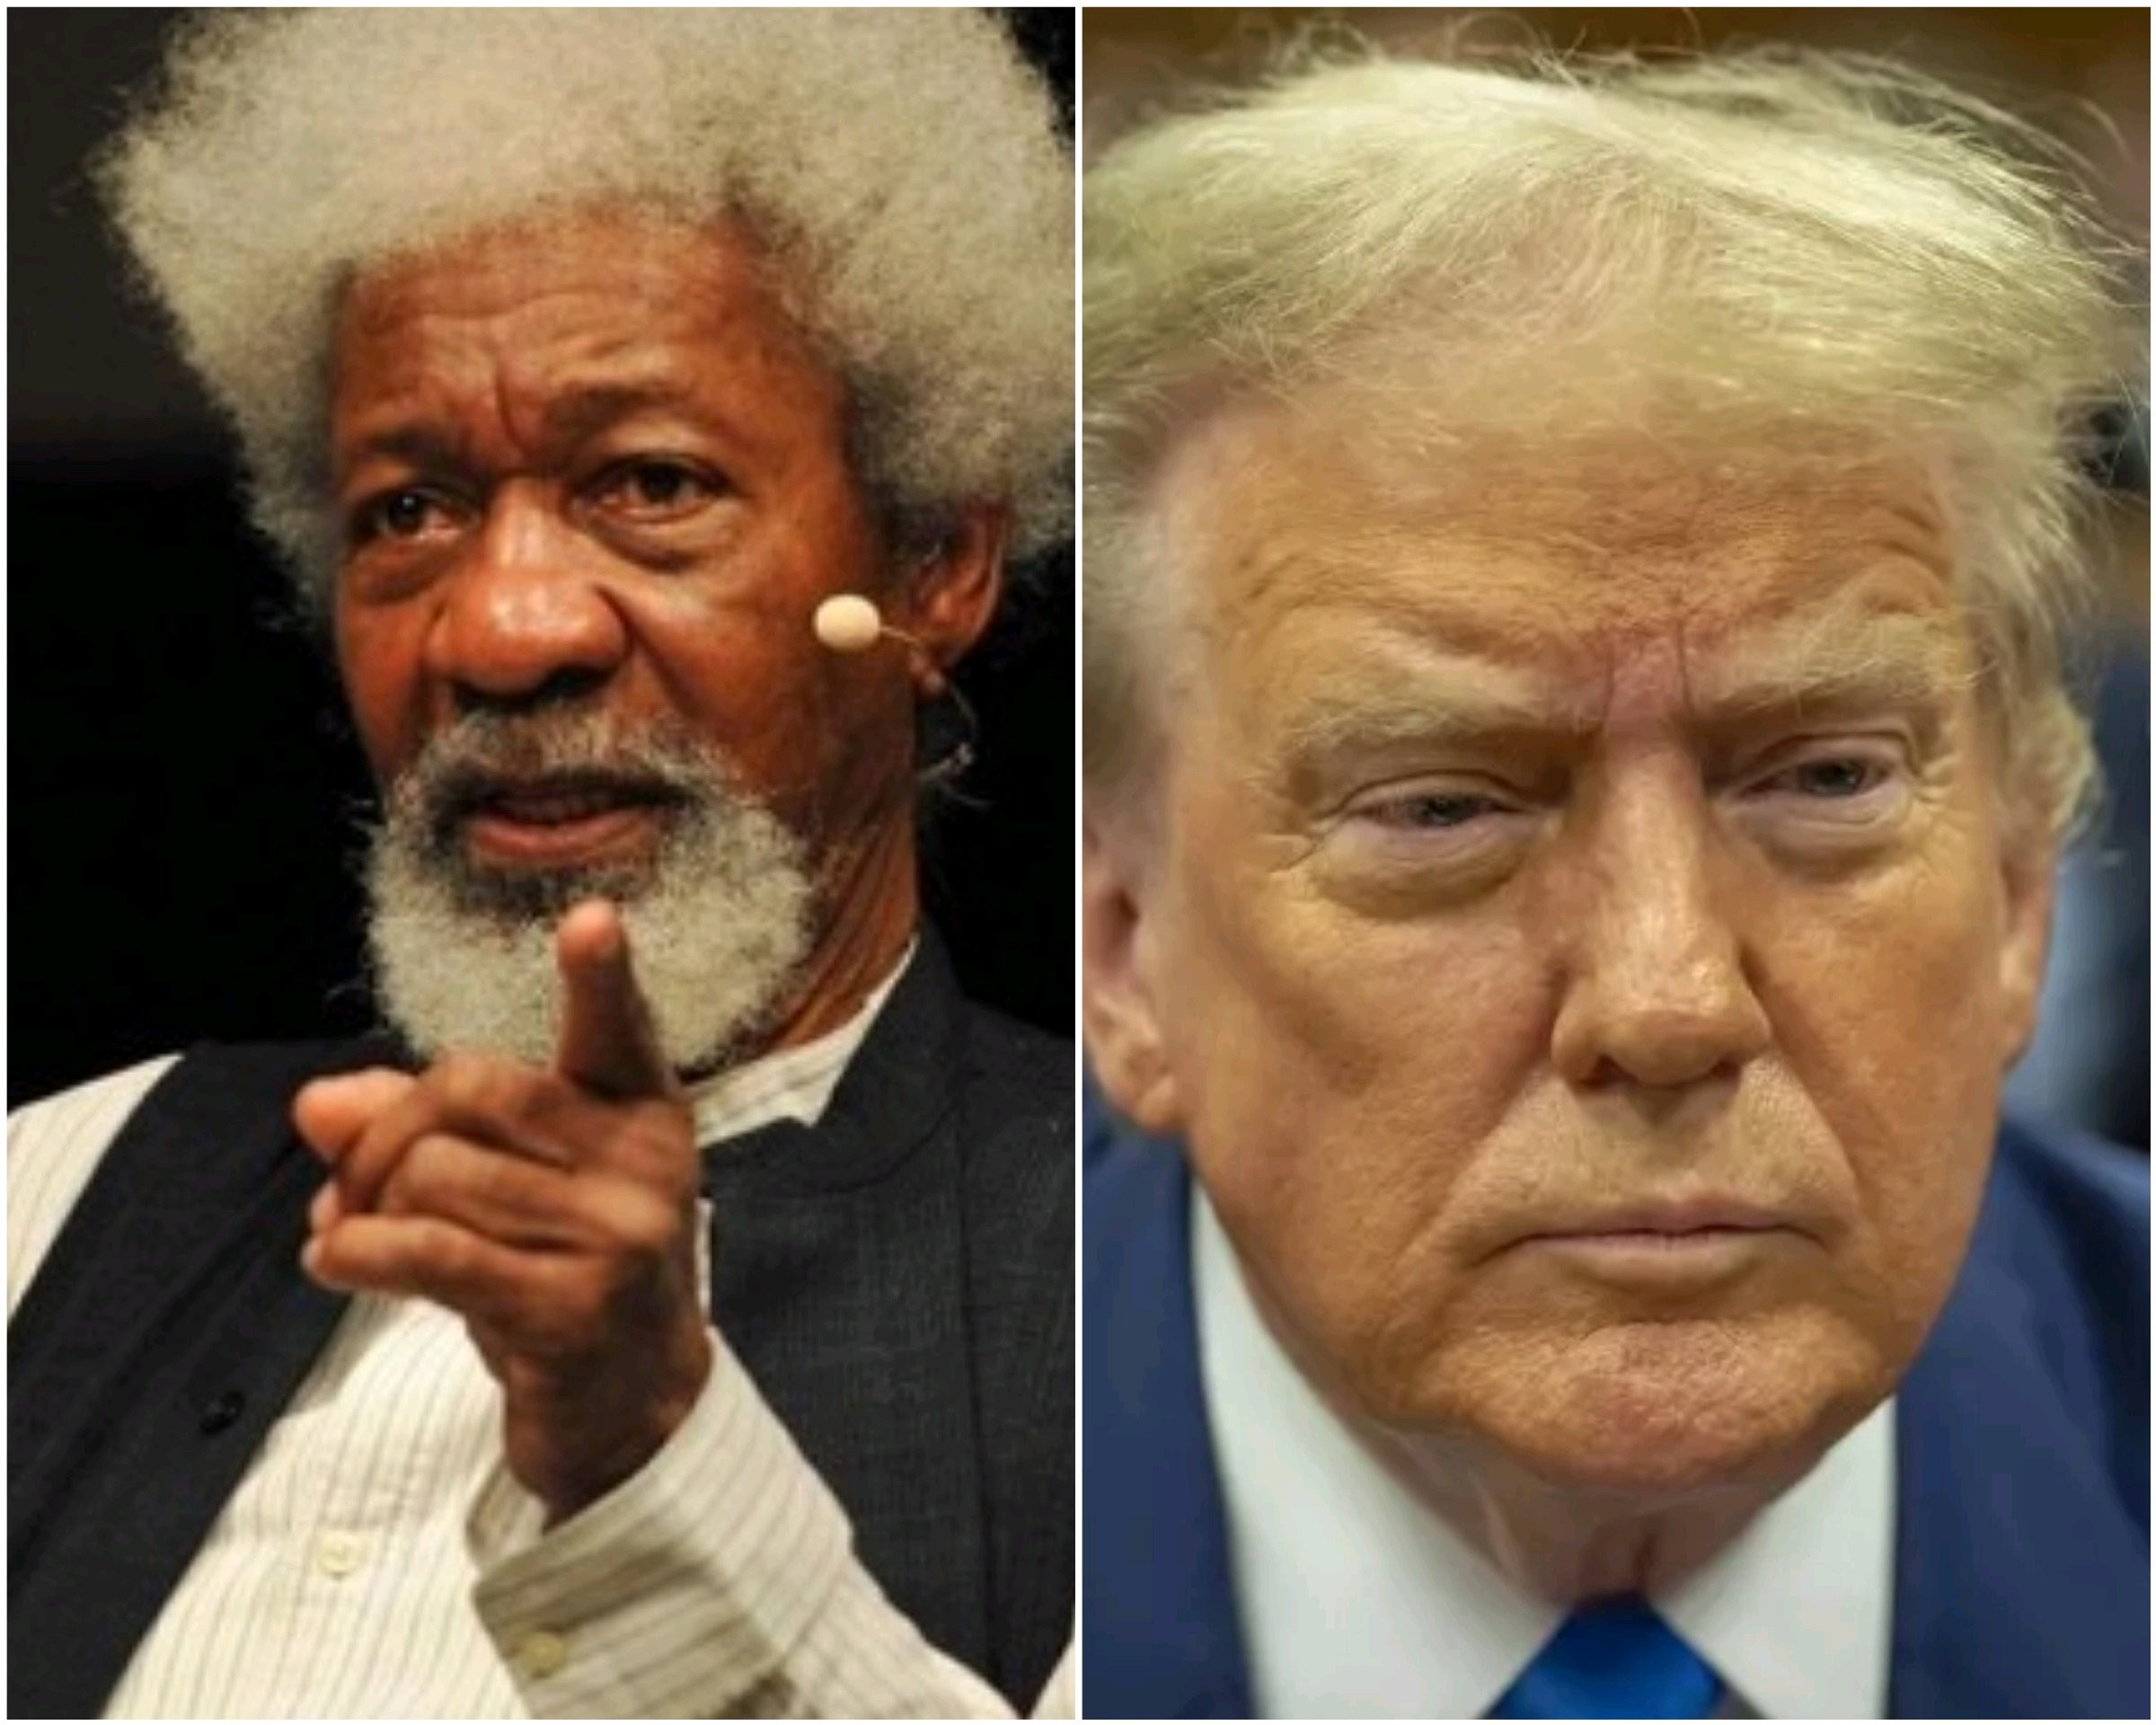 Trump Conviction: Soyinka Is Thinking About Relocating Permanently to the US Since 2016